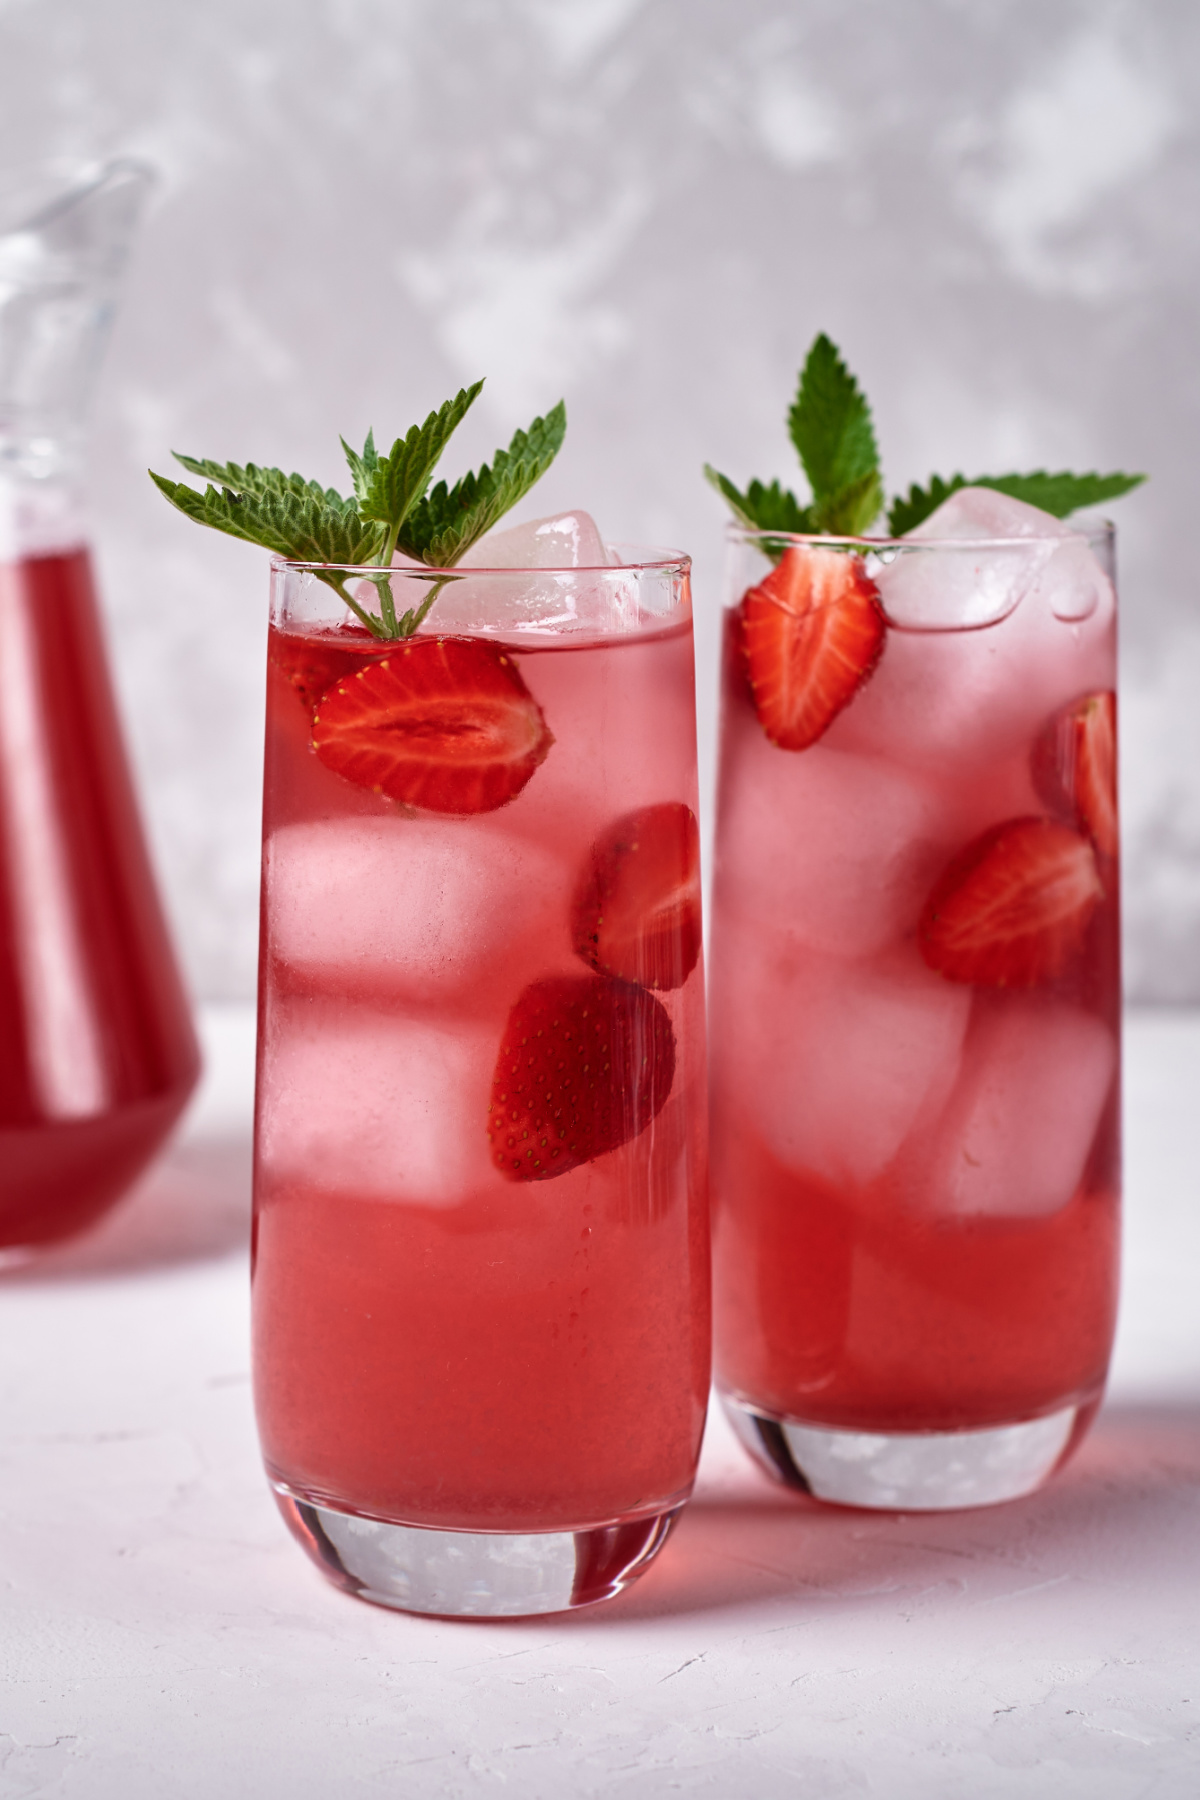 A close up of a Valentine's Day drink.